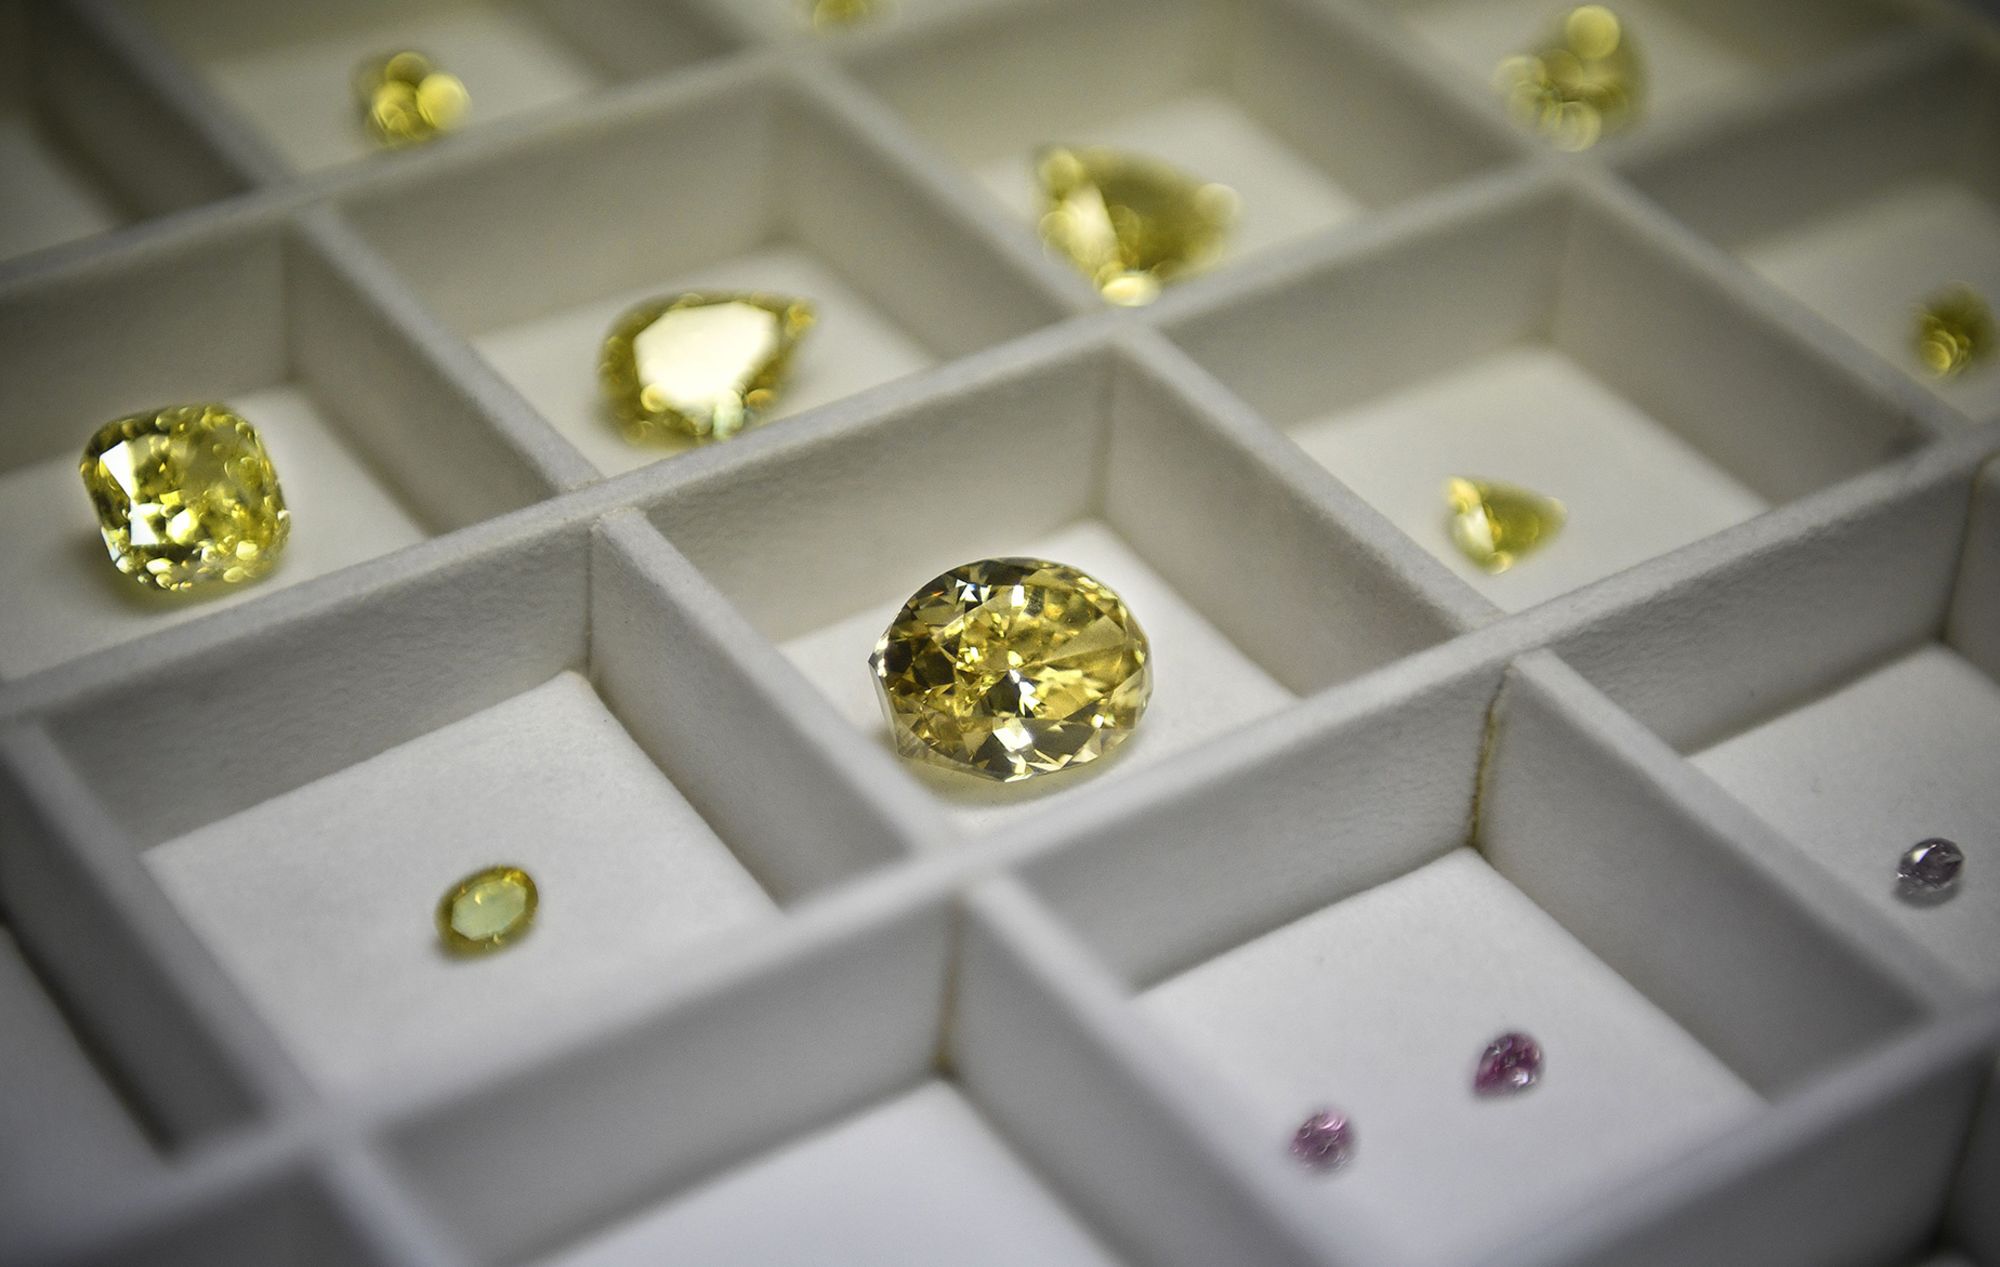 A display of diamonds, among other stones, at the Alrosa Diamond Cutting Division in Moscow on July 3, 2019.